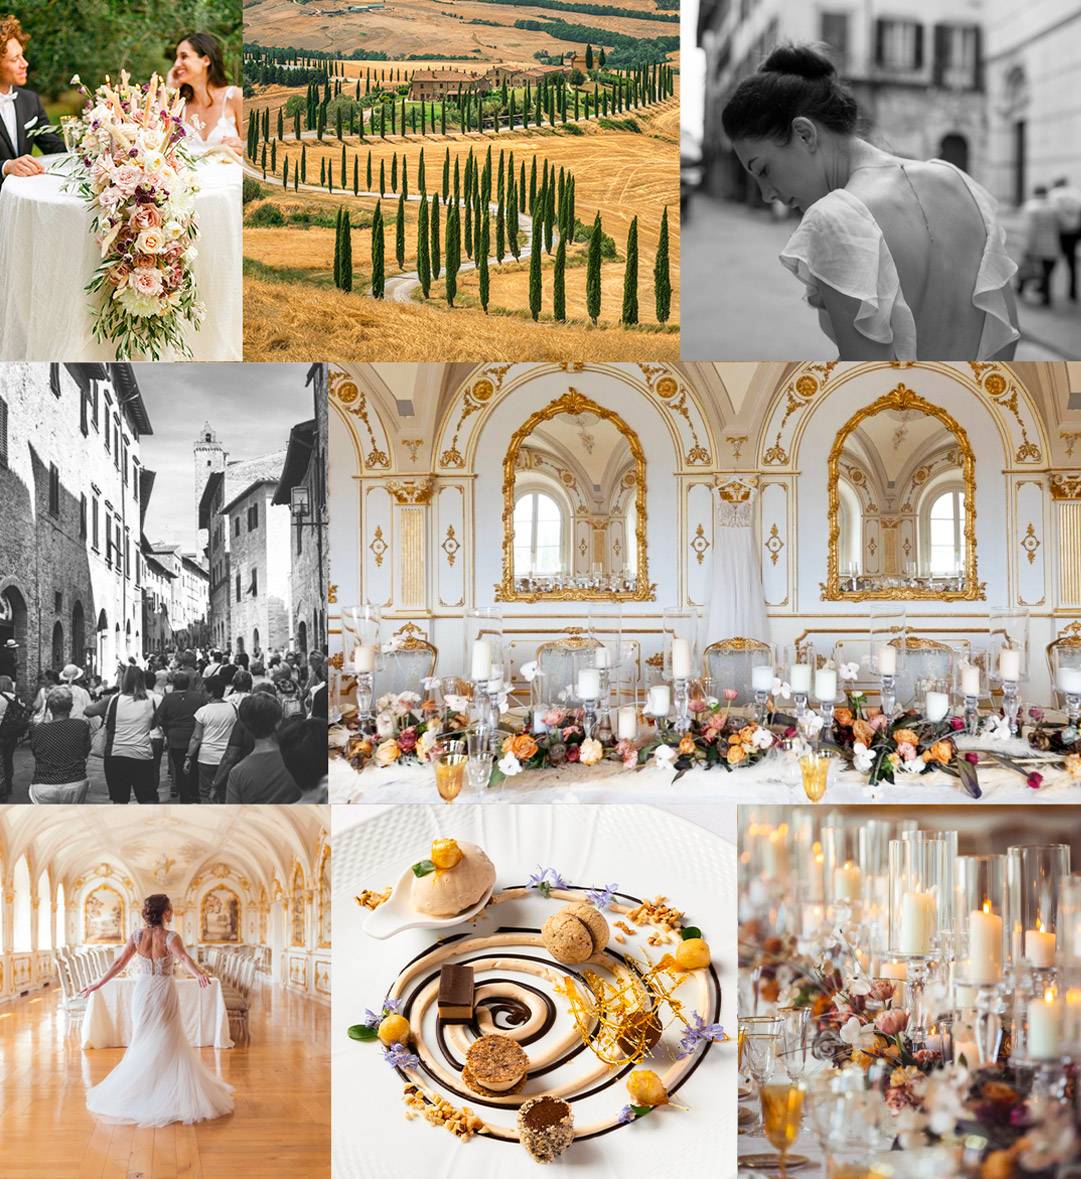 A WEDDING IN TUSCANY MAGNIFICENT SCENERY, DELICIOUS CUISINE AND ITALIAN ROMANCE